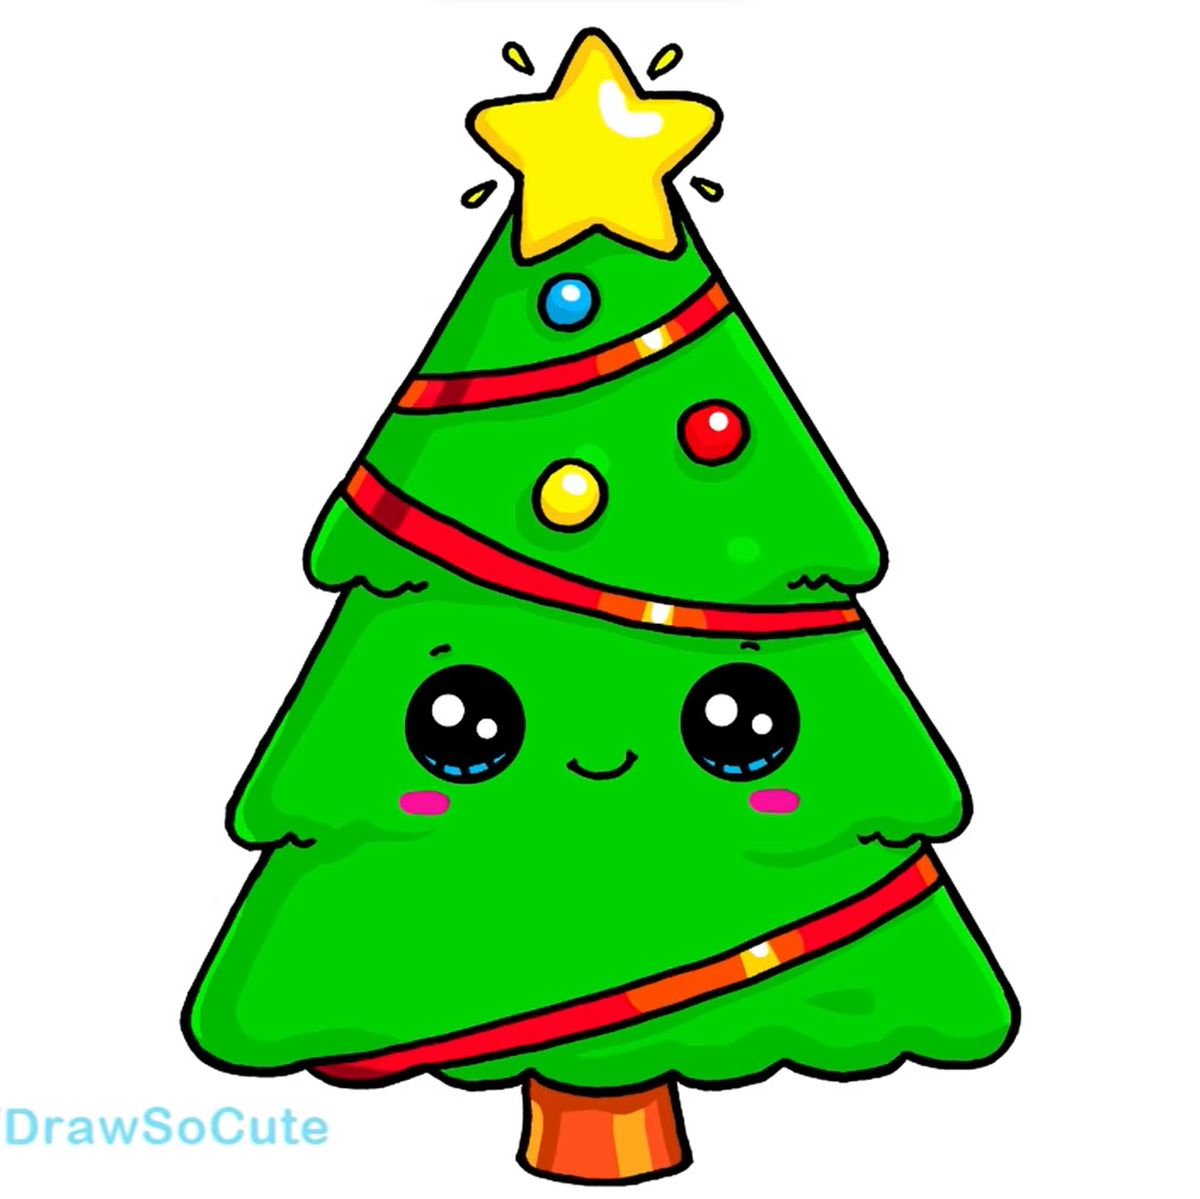 How To Draw A Cute Christmas Tree